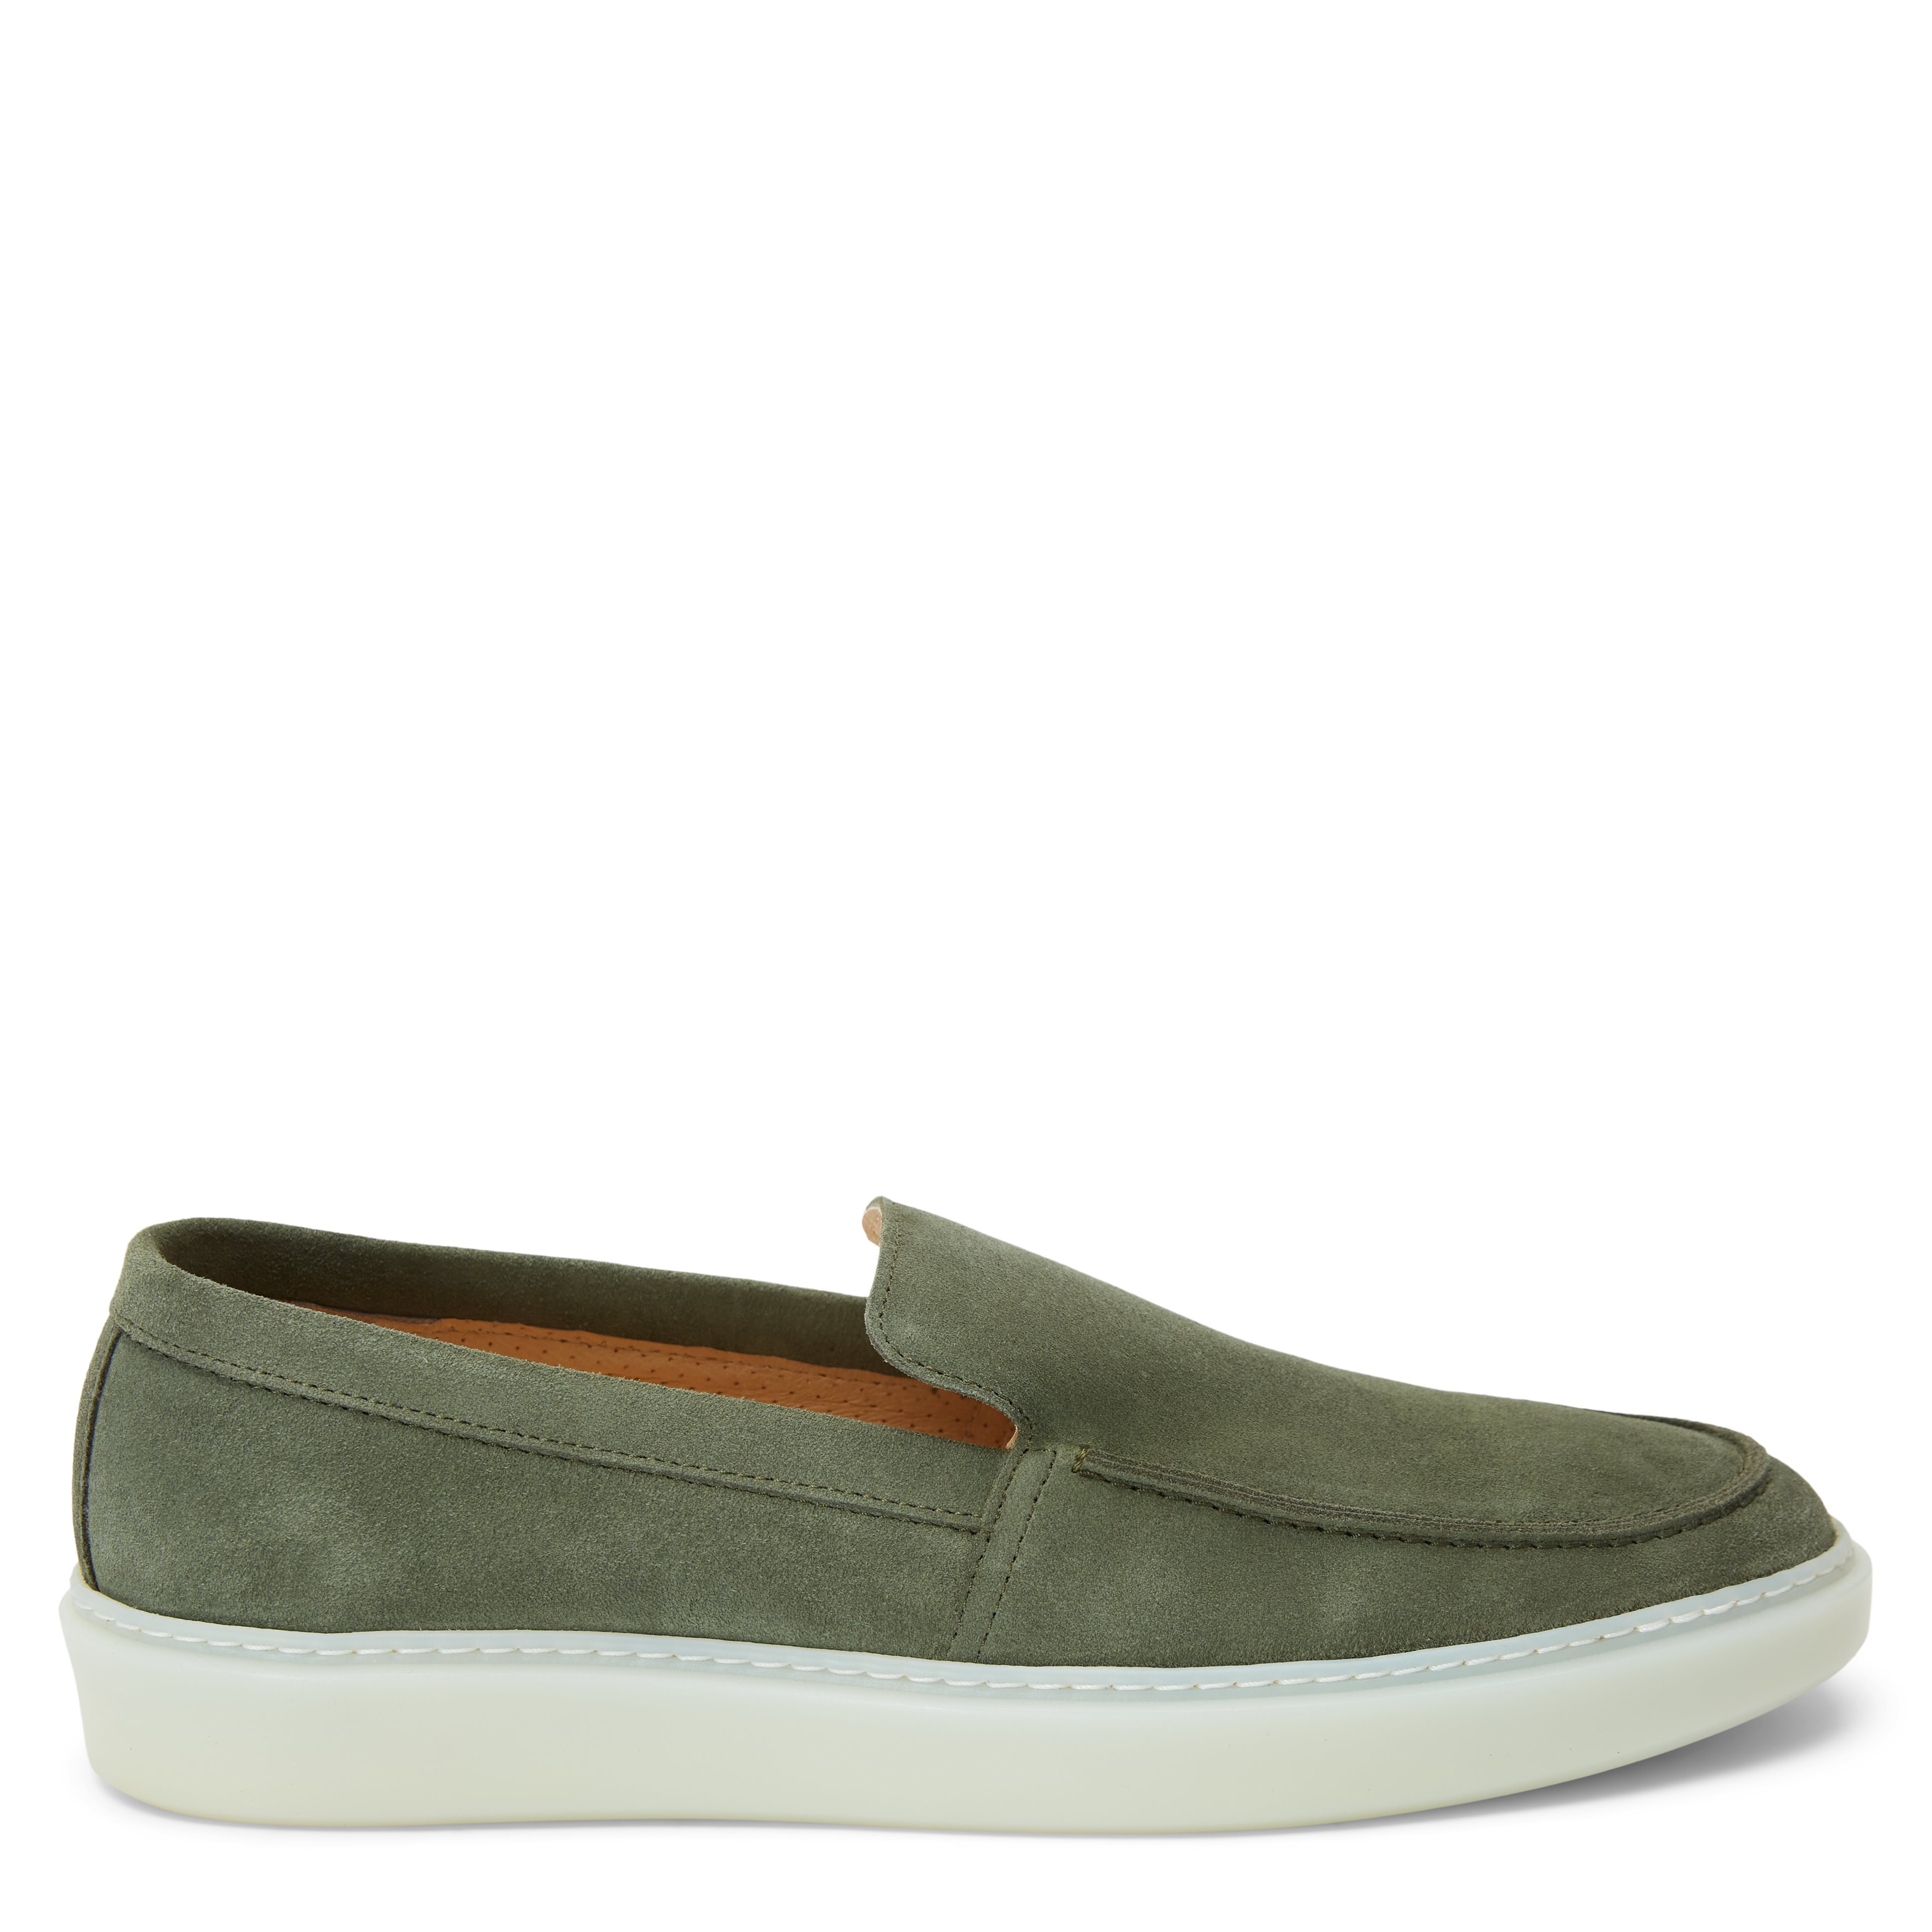 Ahler Shoes A41 11350 Green